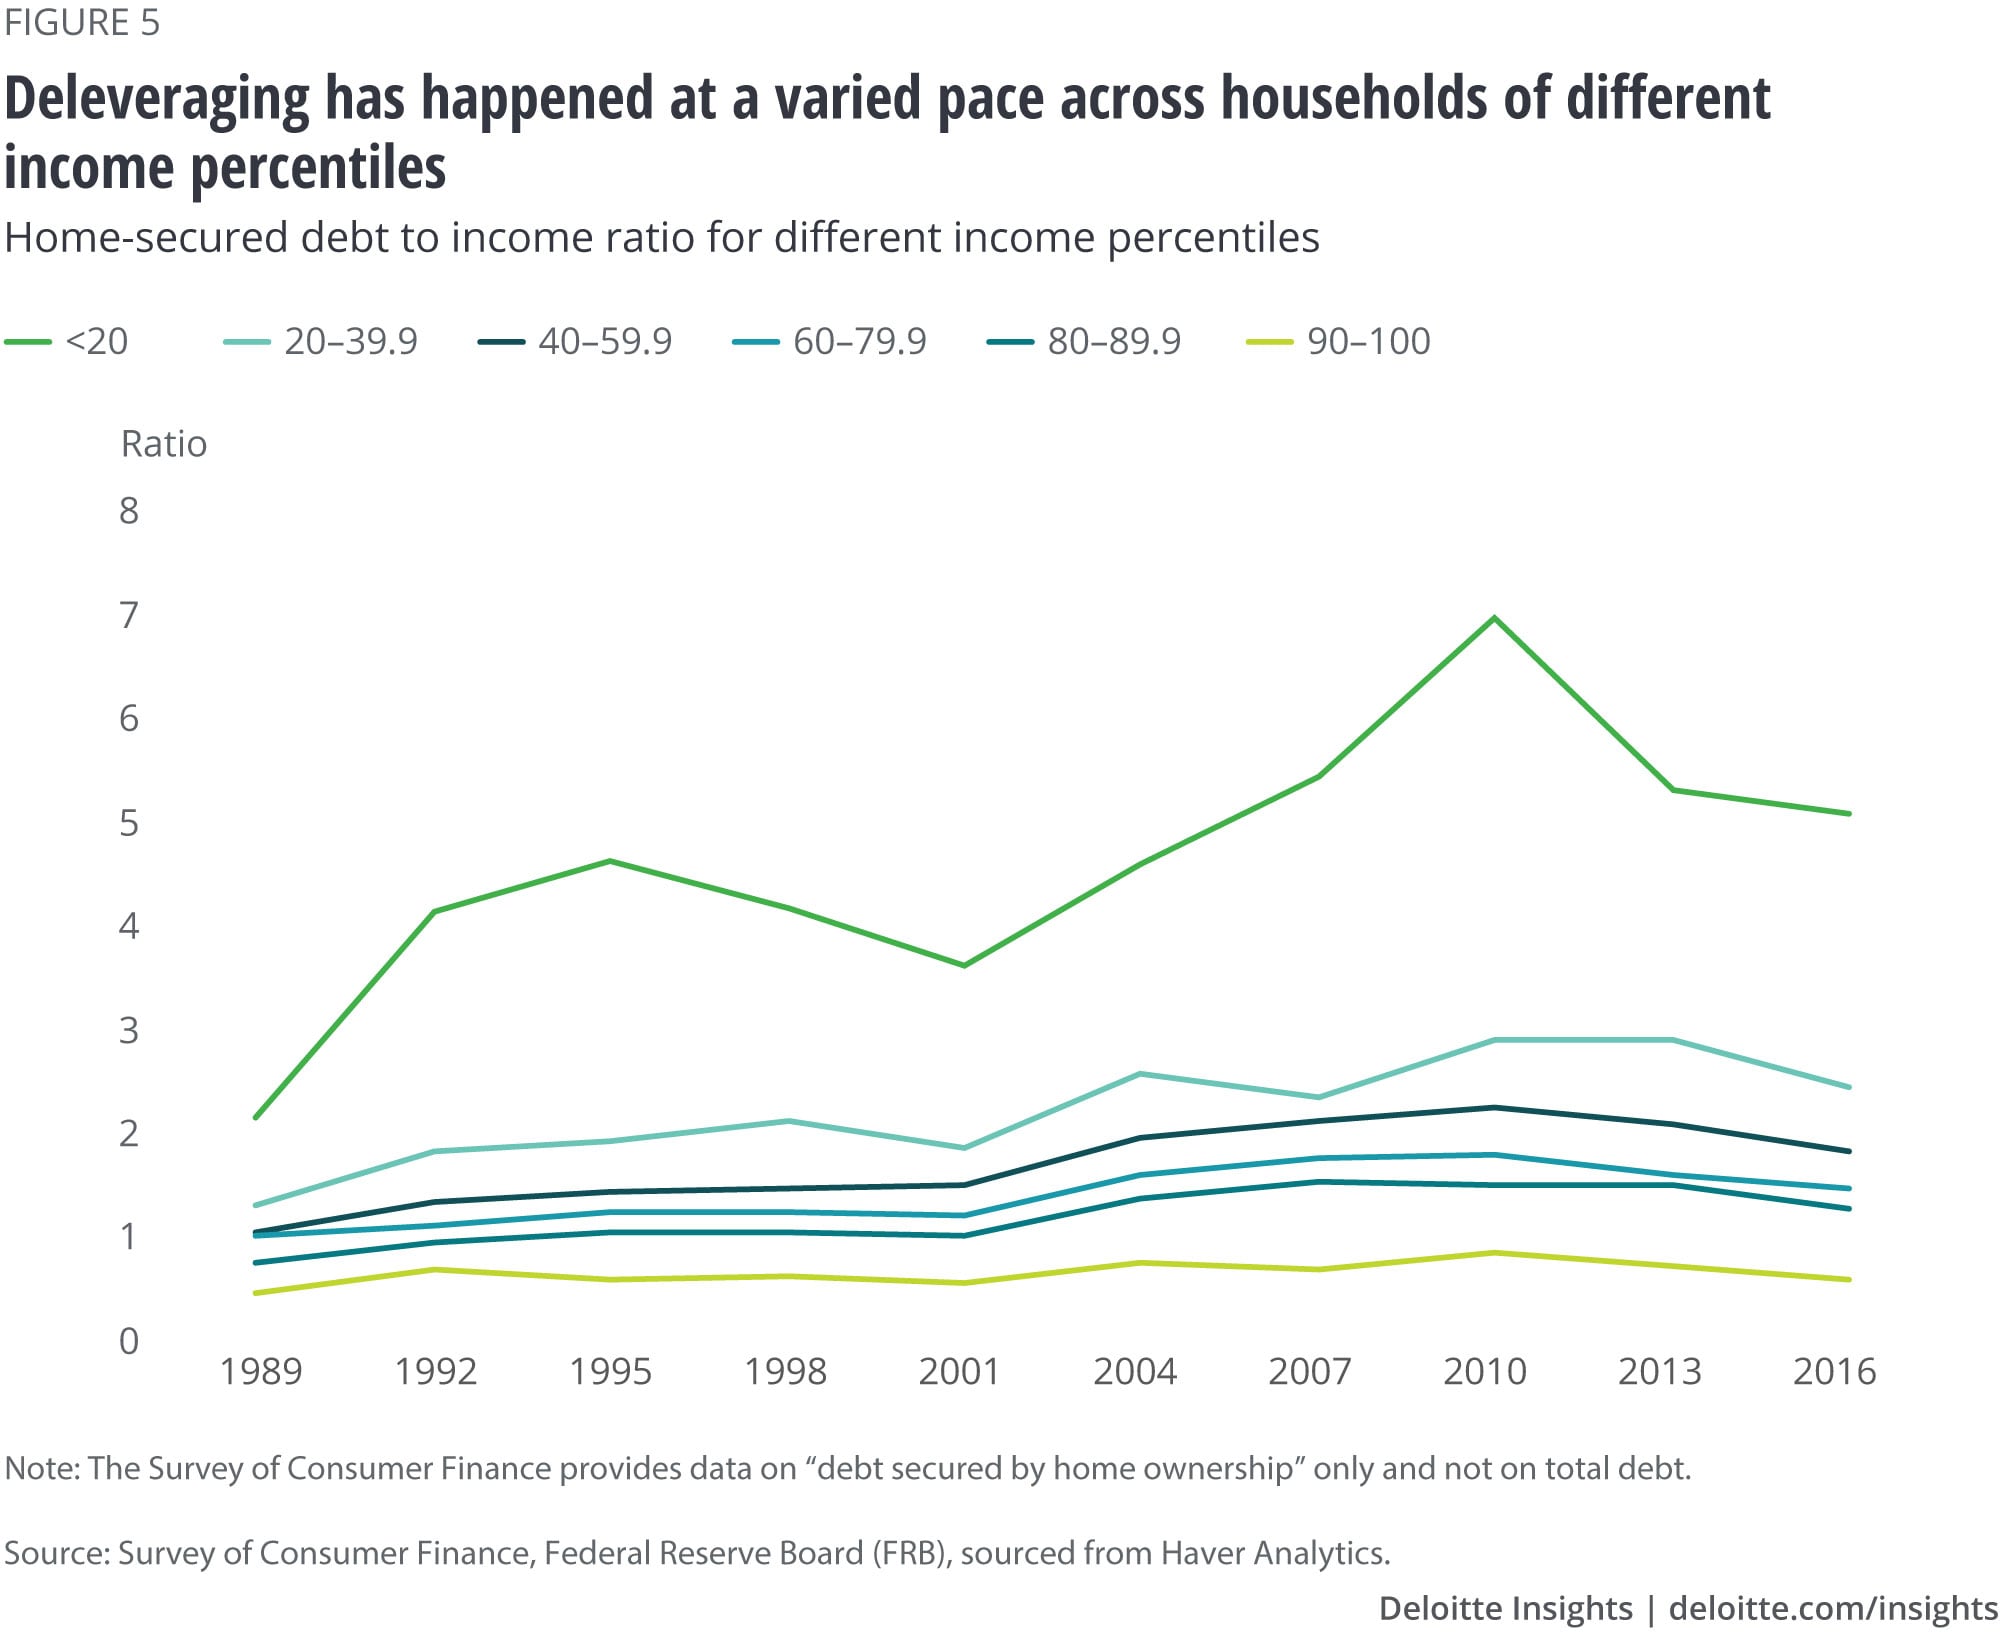 Deleveraging has happened at a varied pace across households of different income percentiles